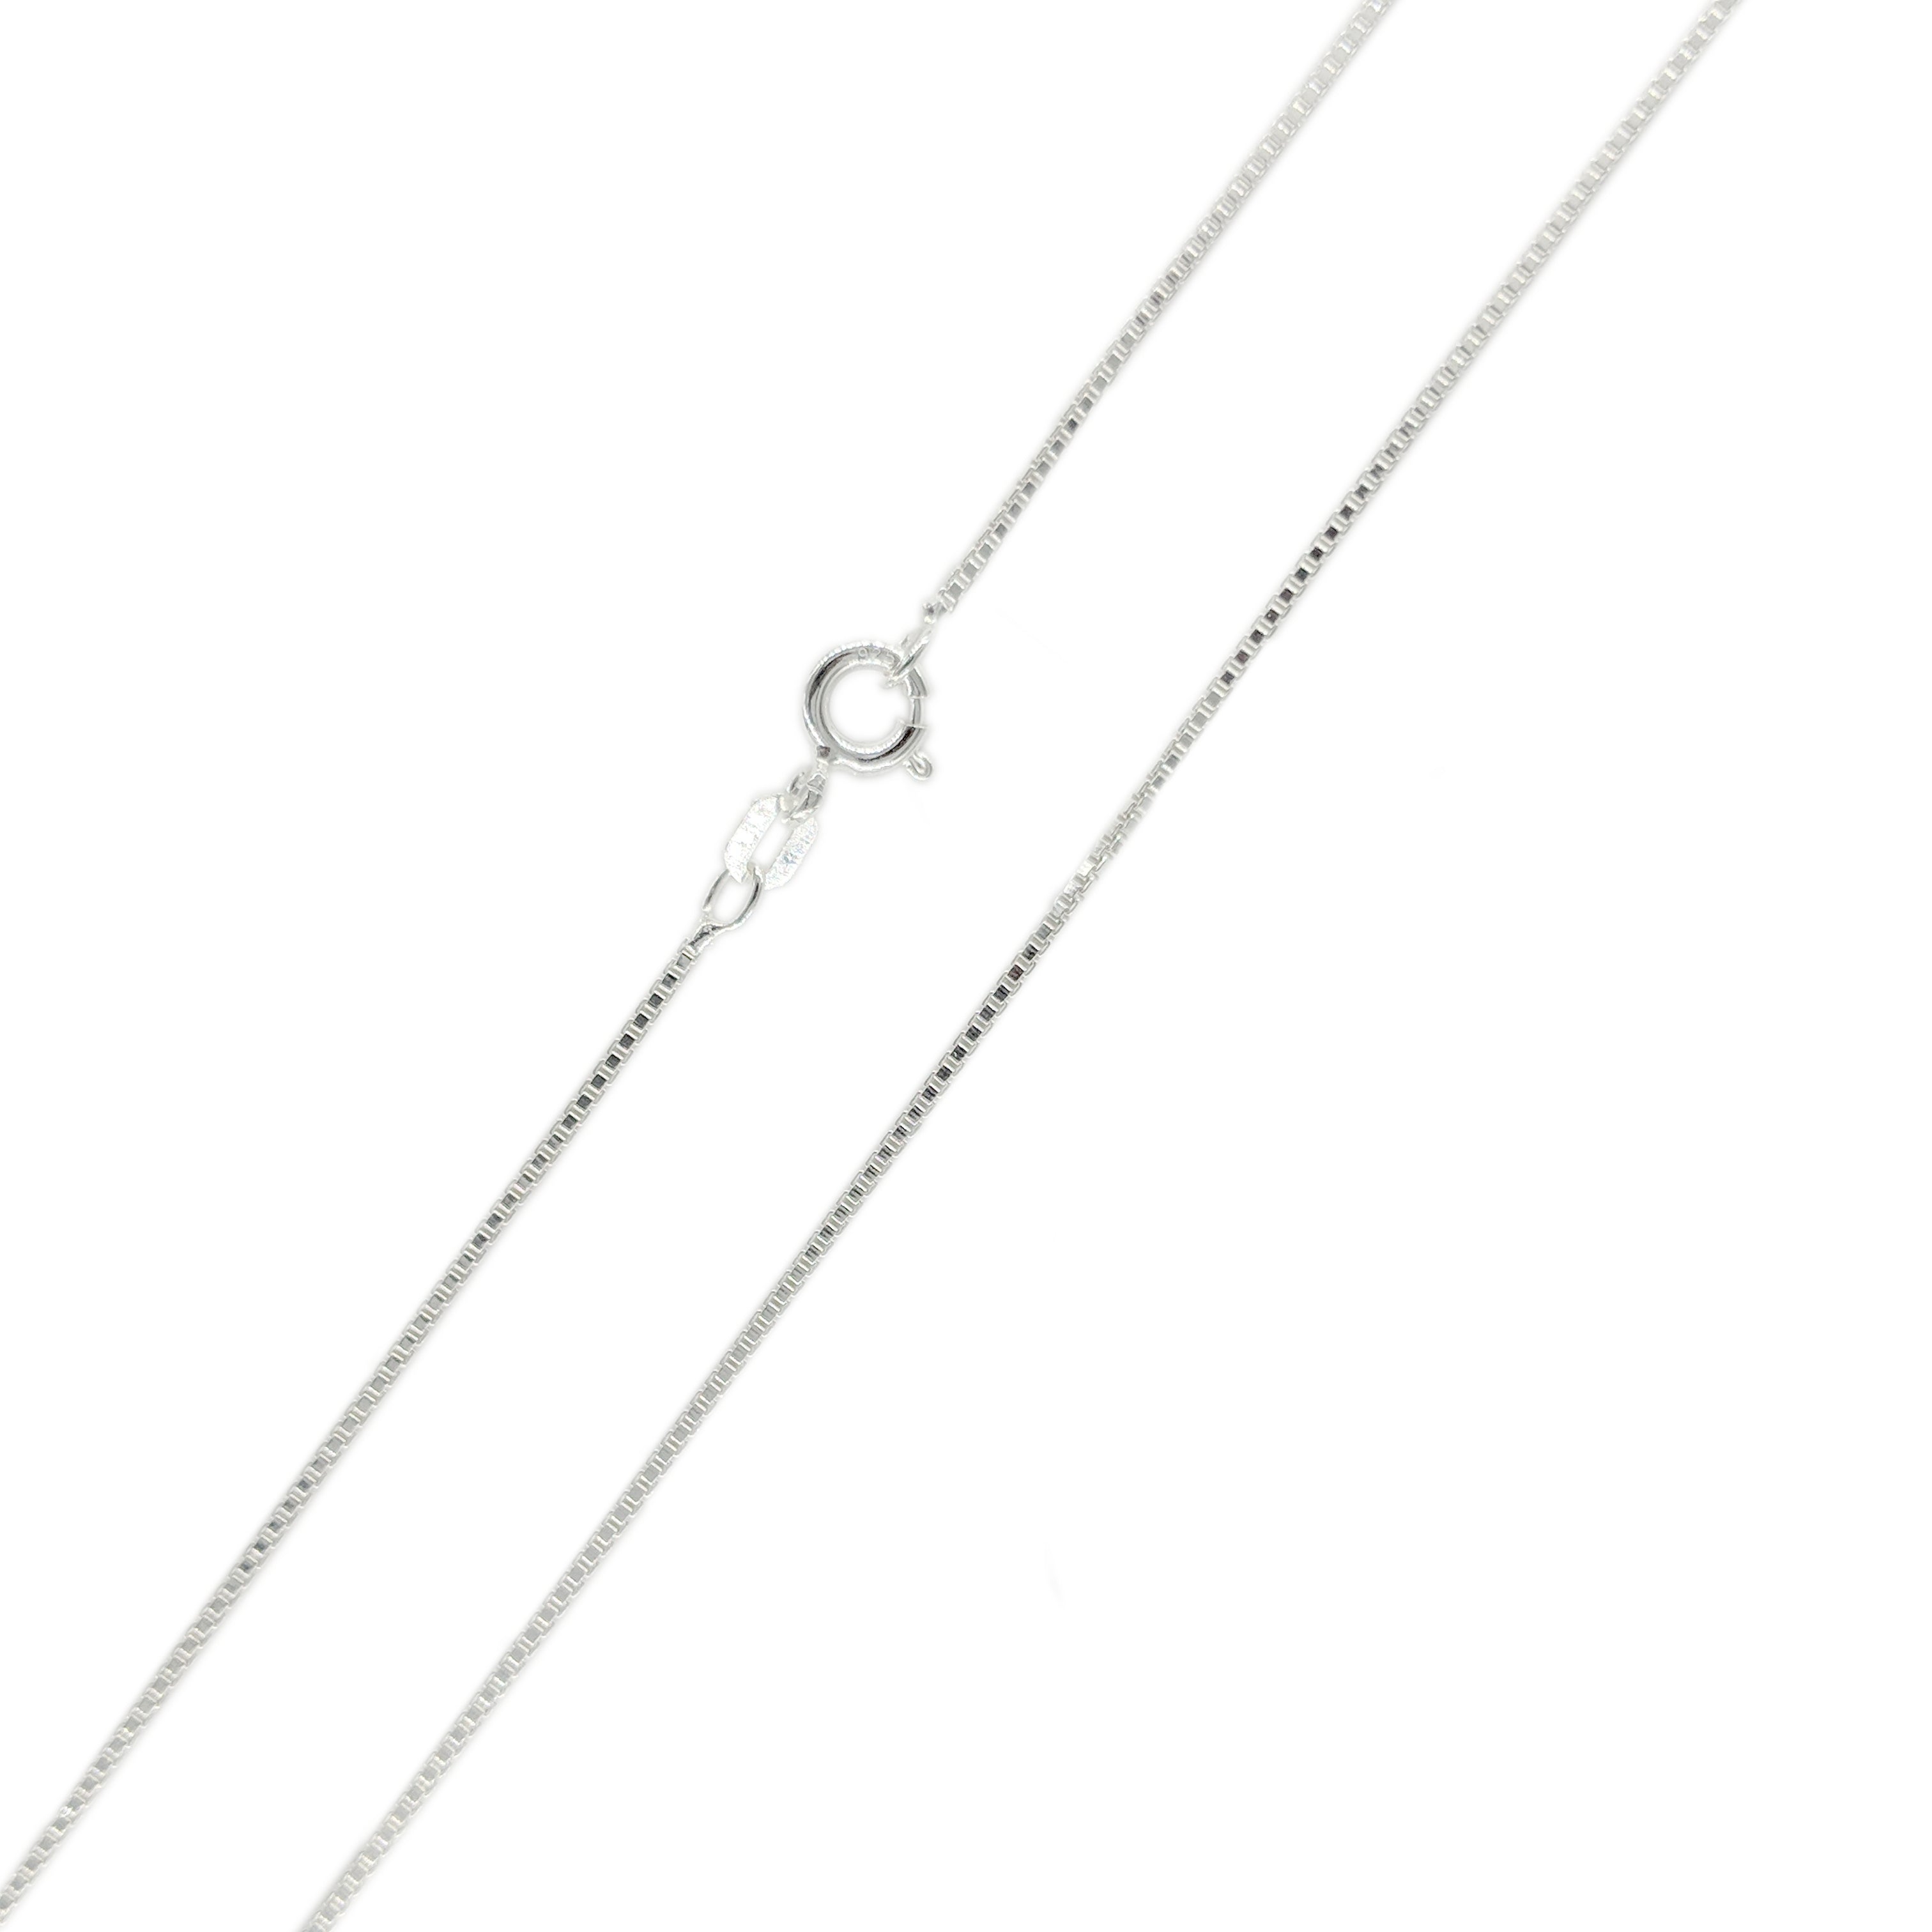 Sterling Silver Box Chain, Thin Necklace for Pendant, 16 to 30 Inches, 1.5 mm Wide 16 Box Chain / Silver